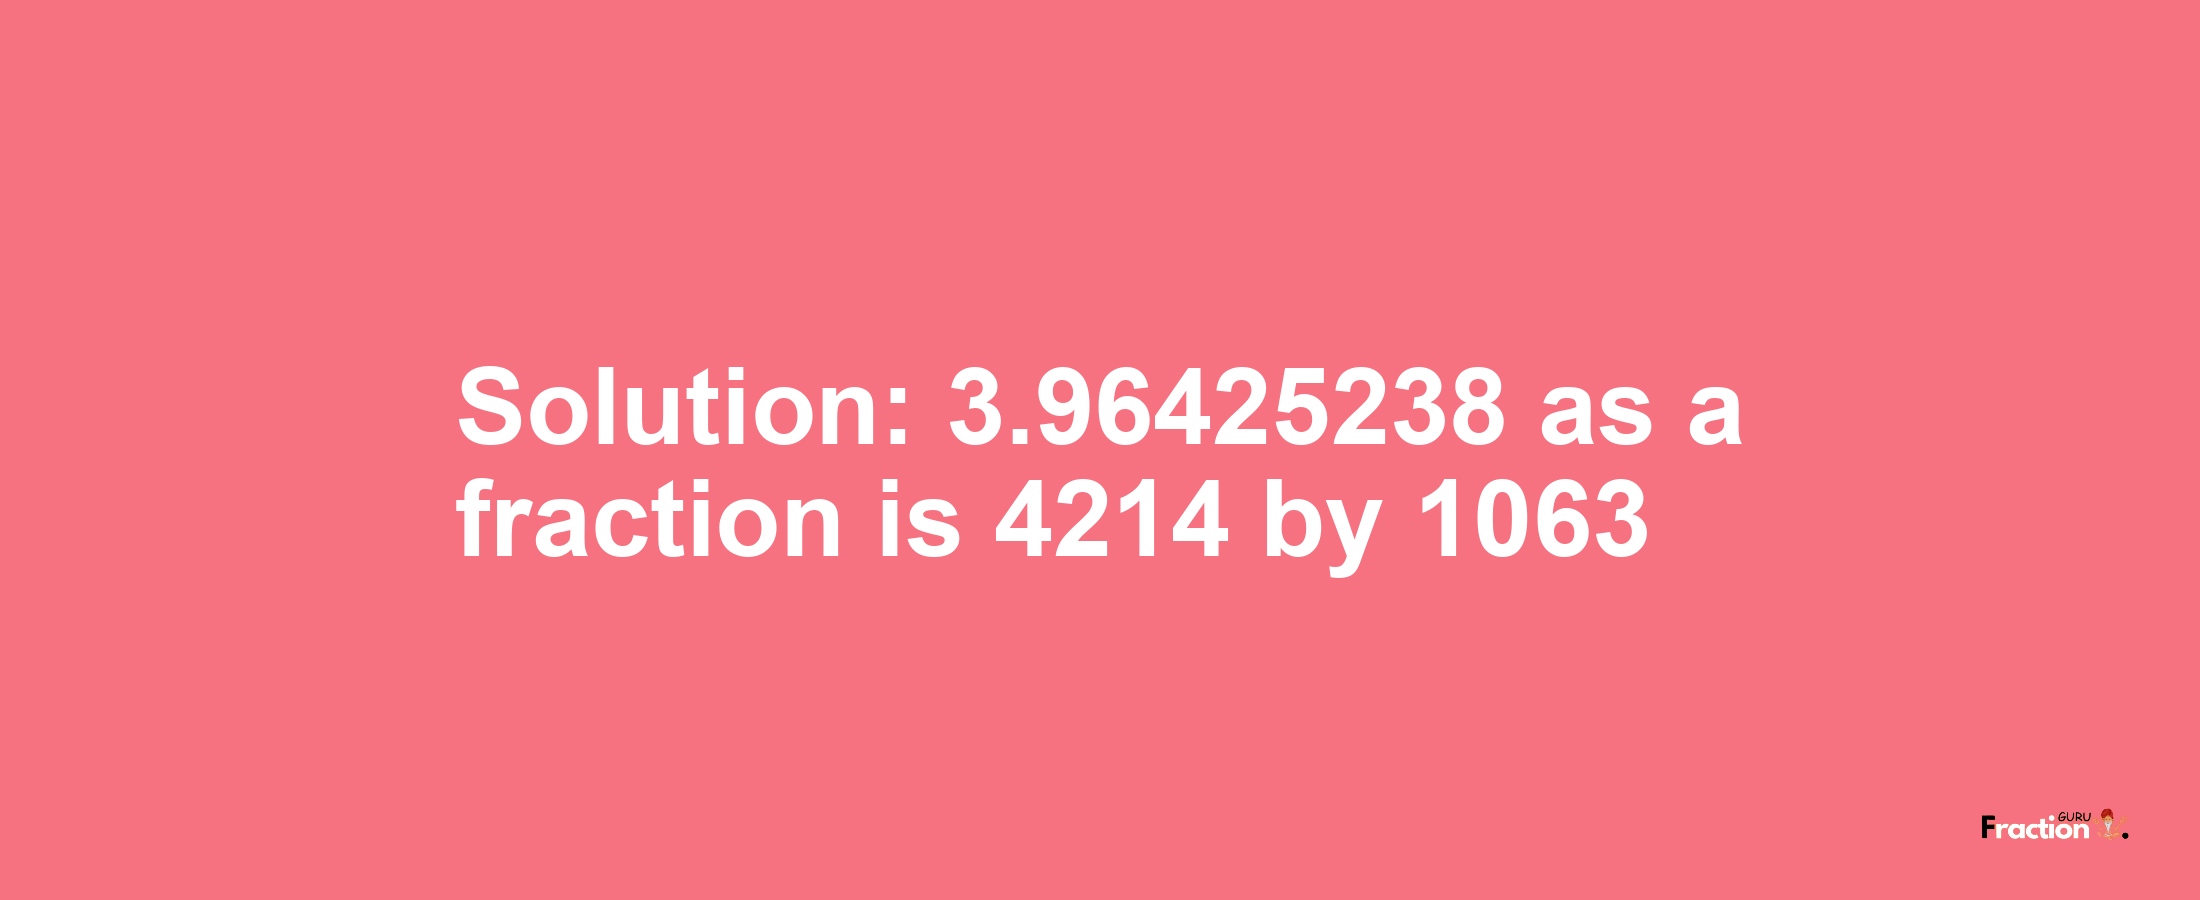 Solution:3.96425238 as a fraction is 4214/1063